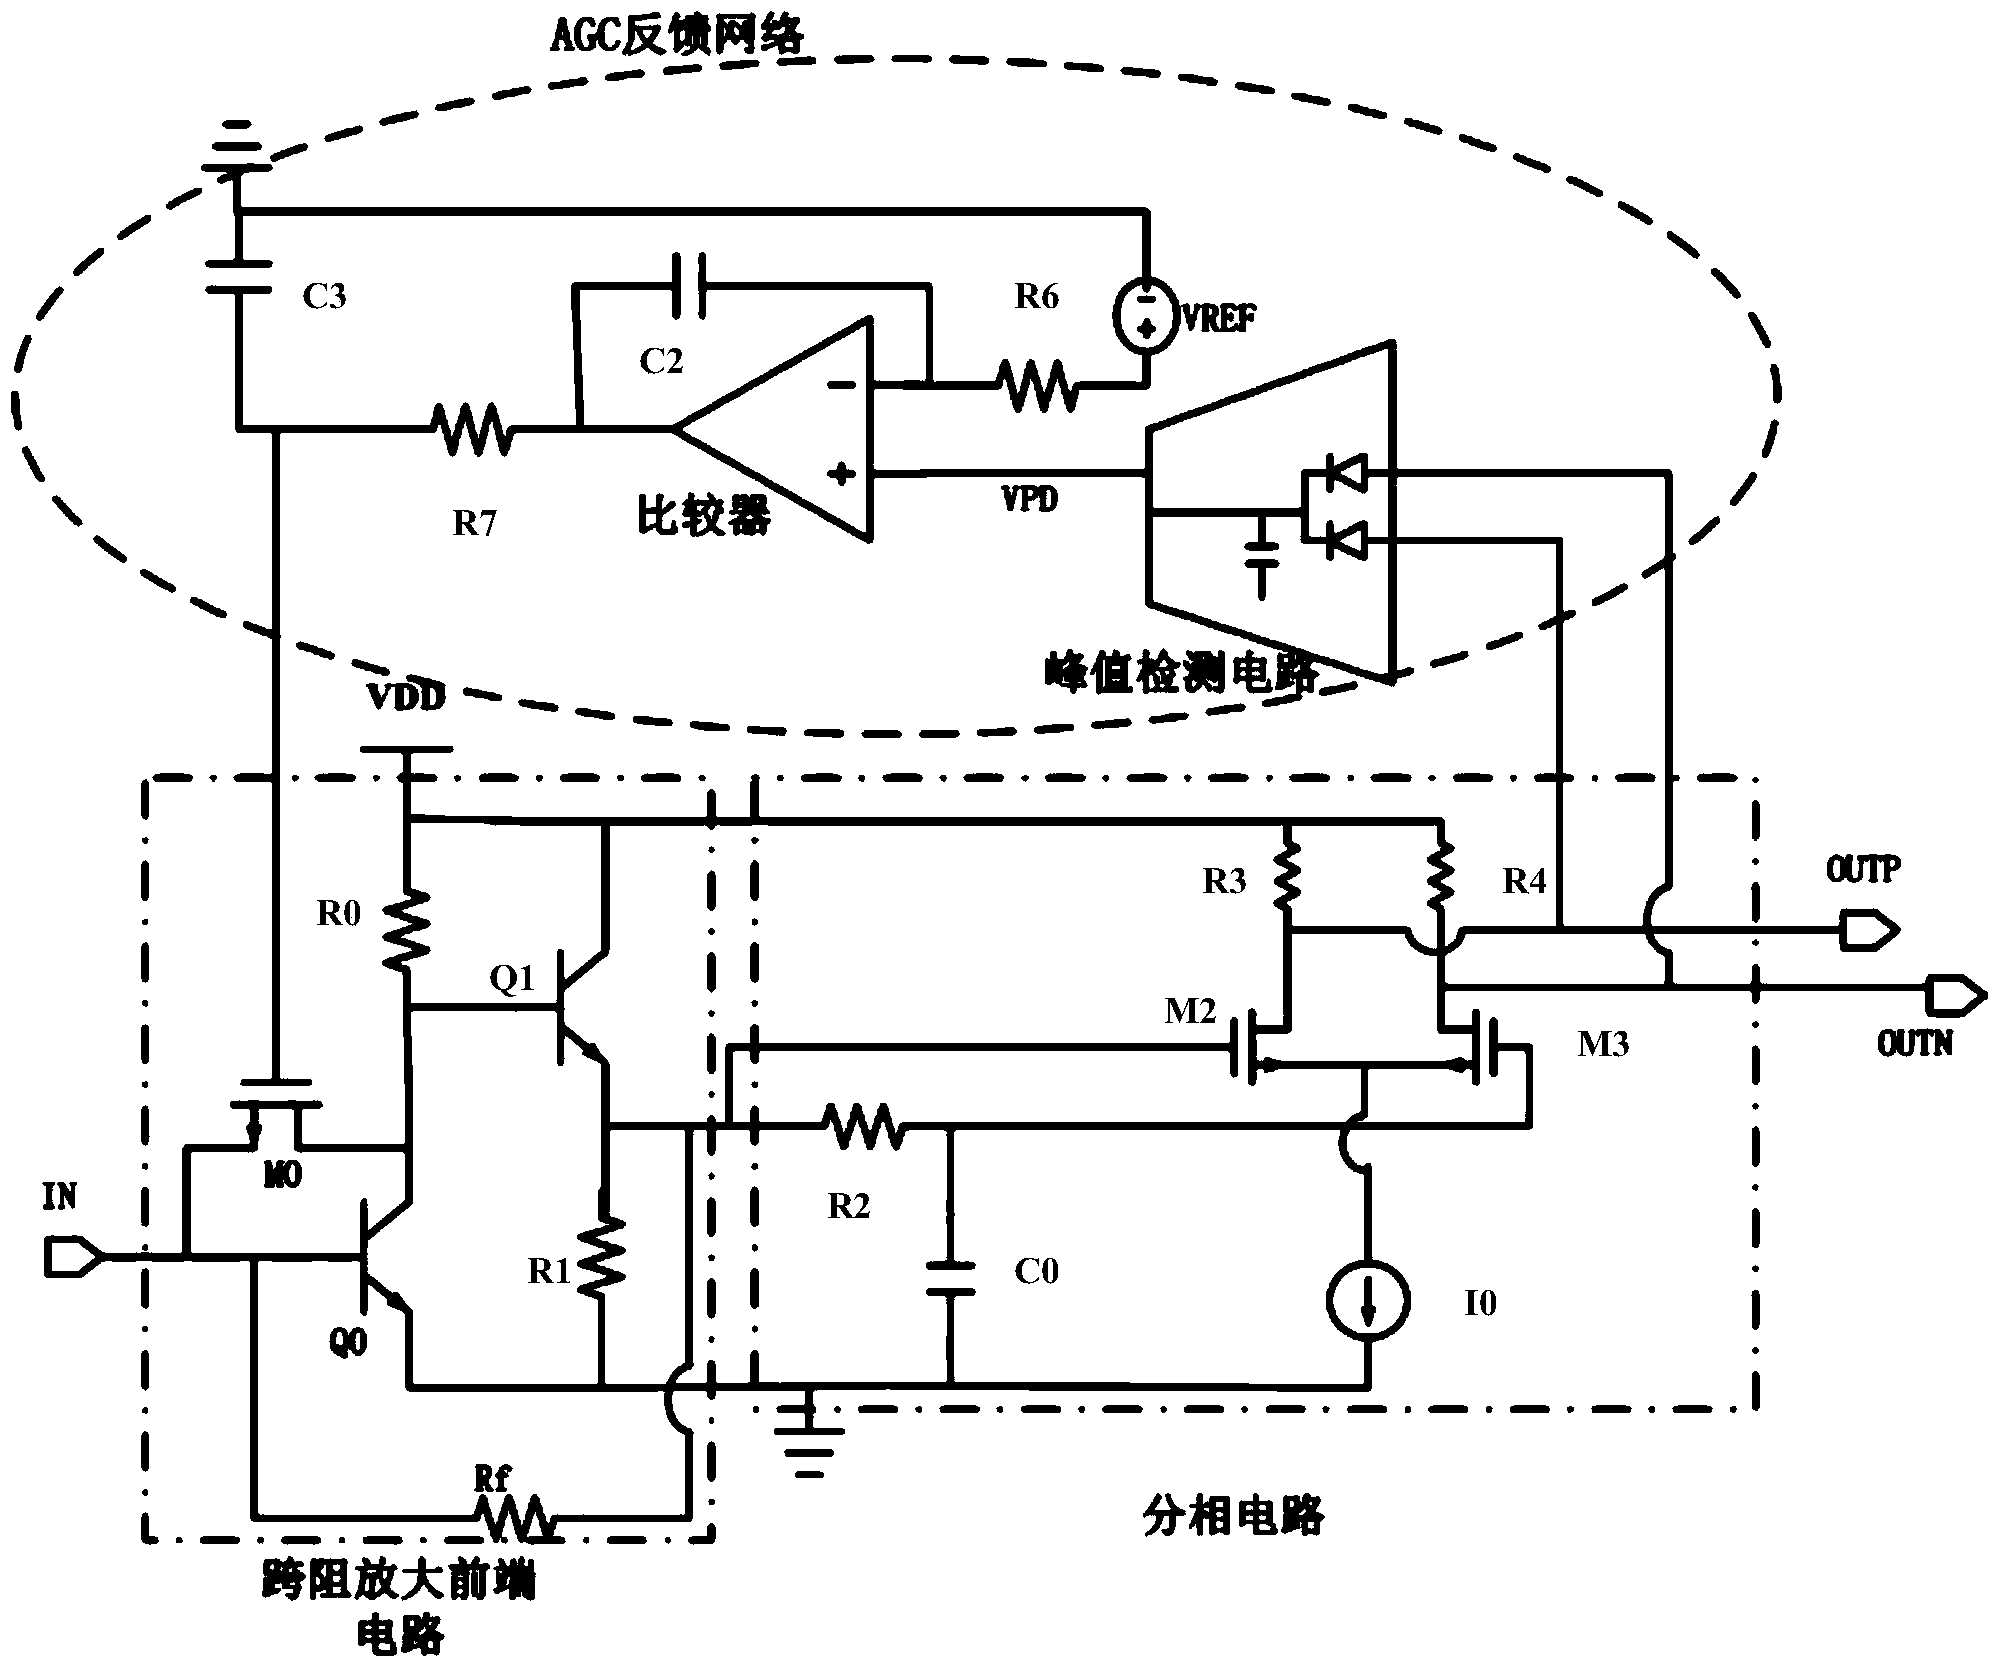 Trans-impedance amplification circuit capable of realizing automatic gain control